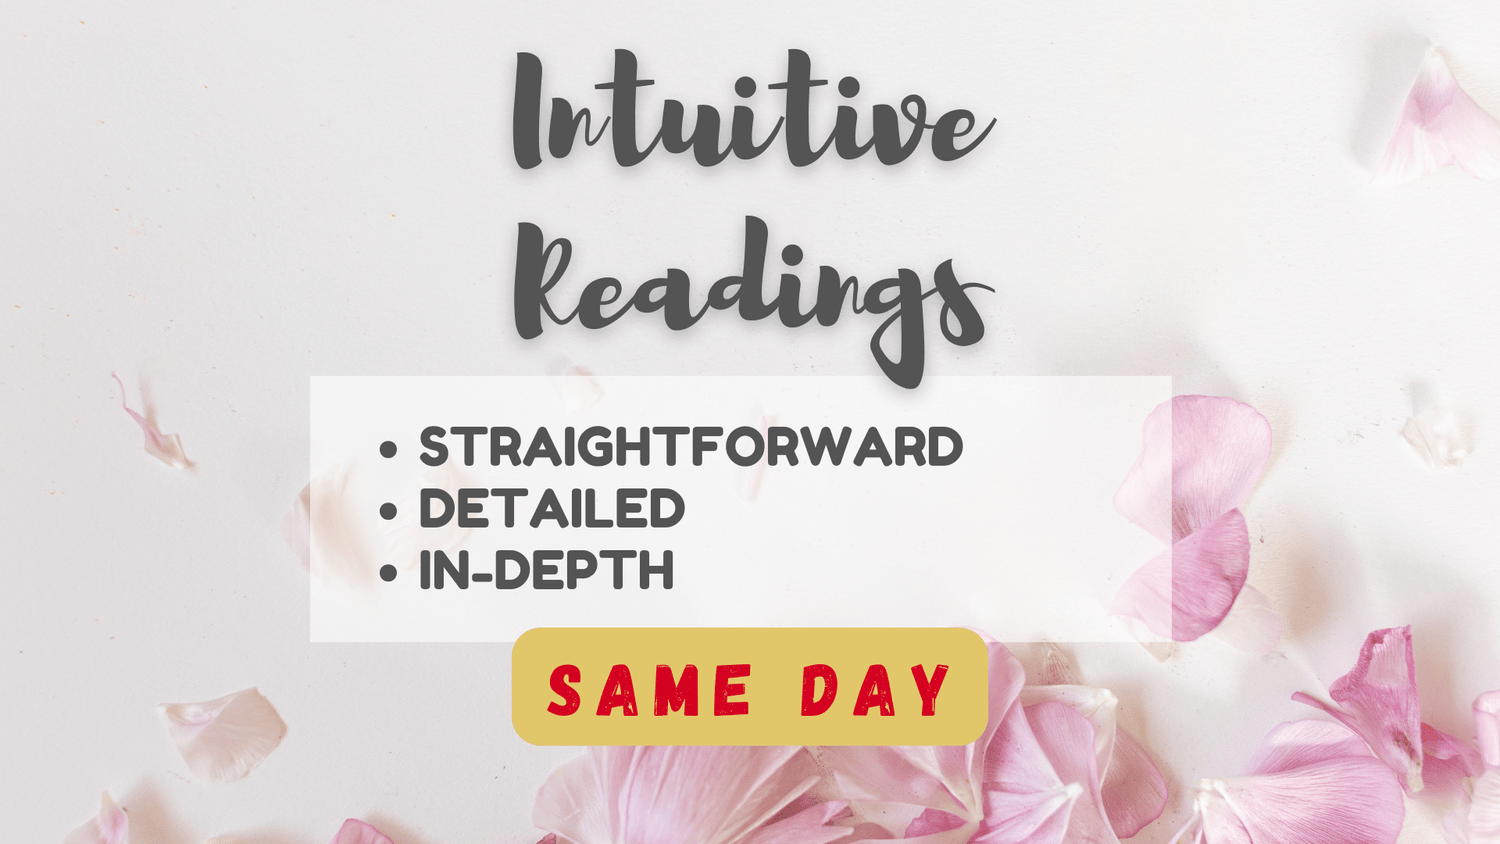 Same Day - Intuitive Readings